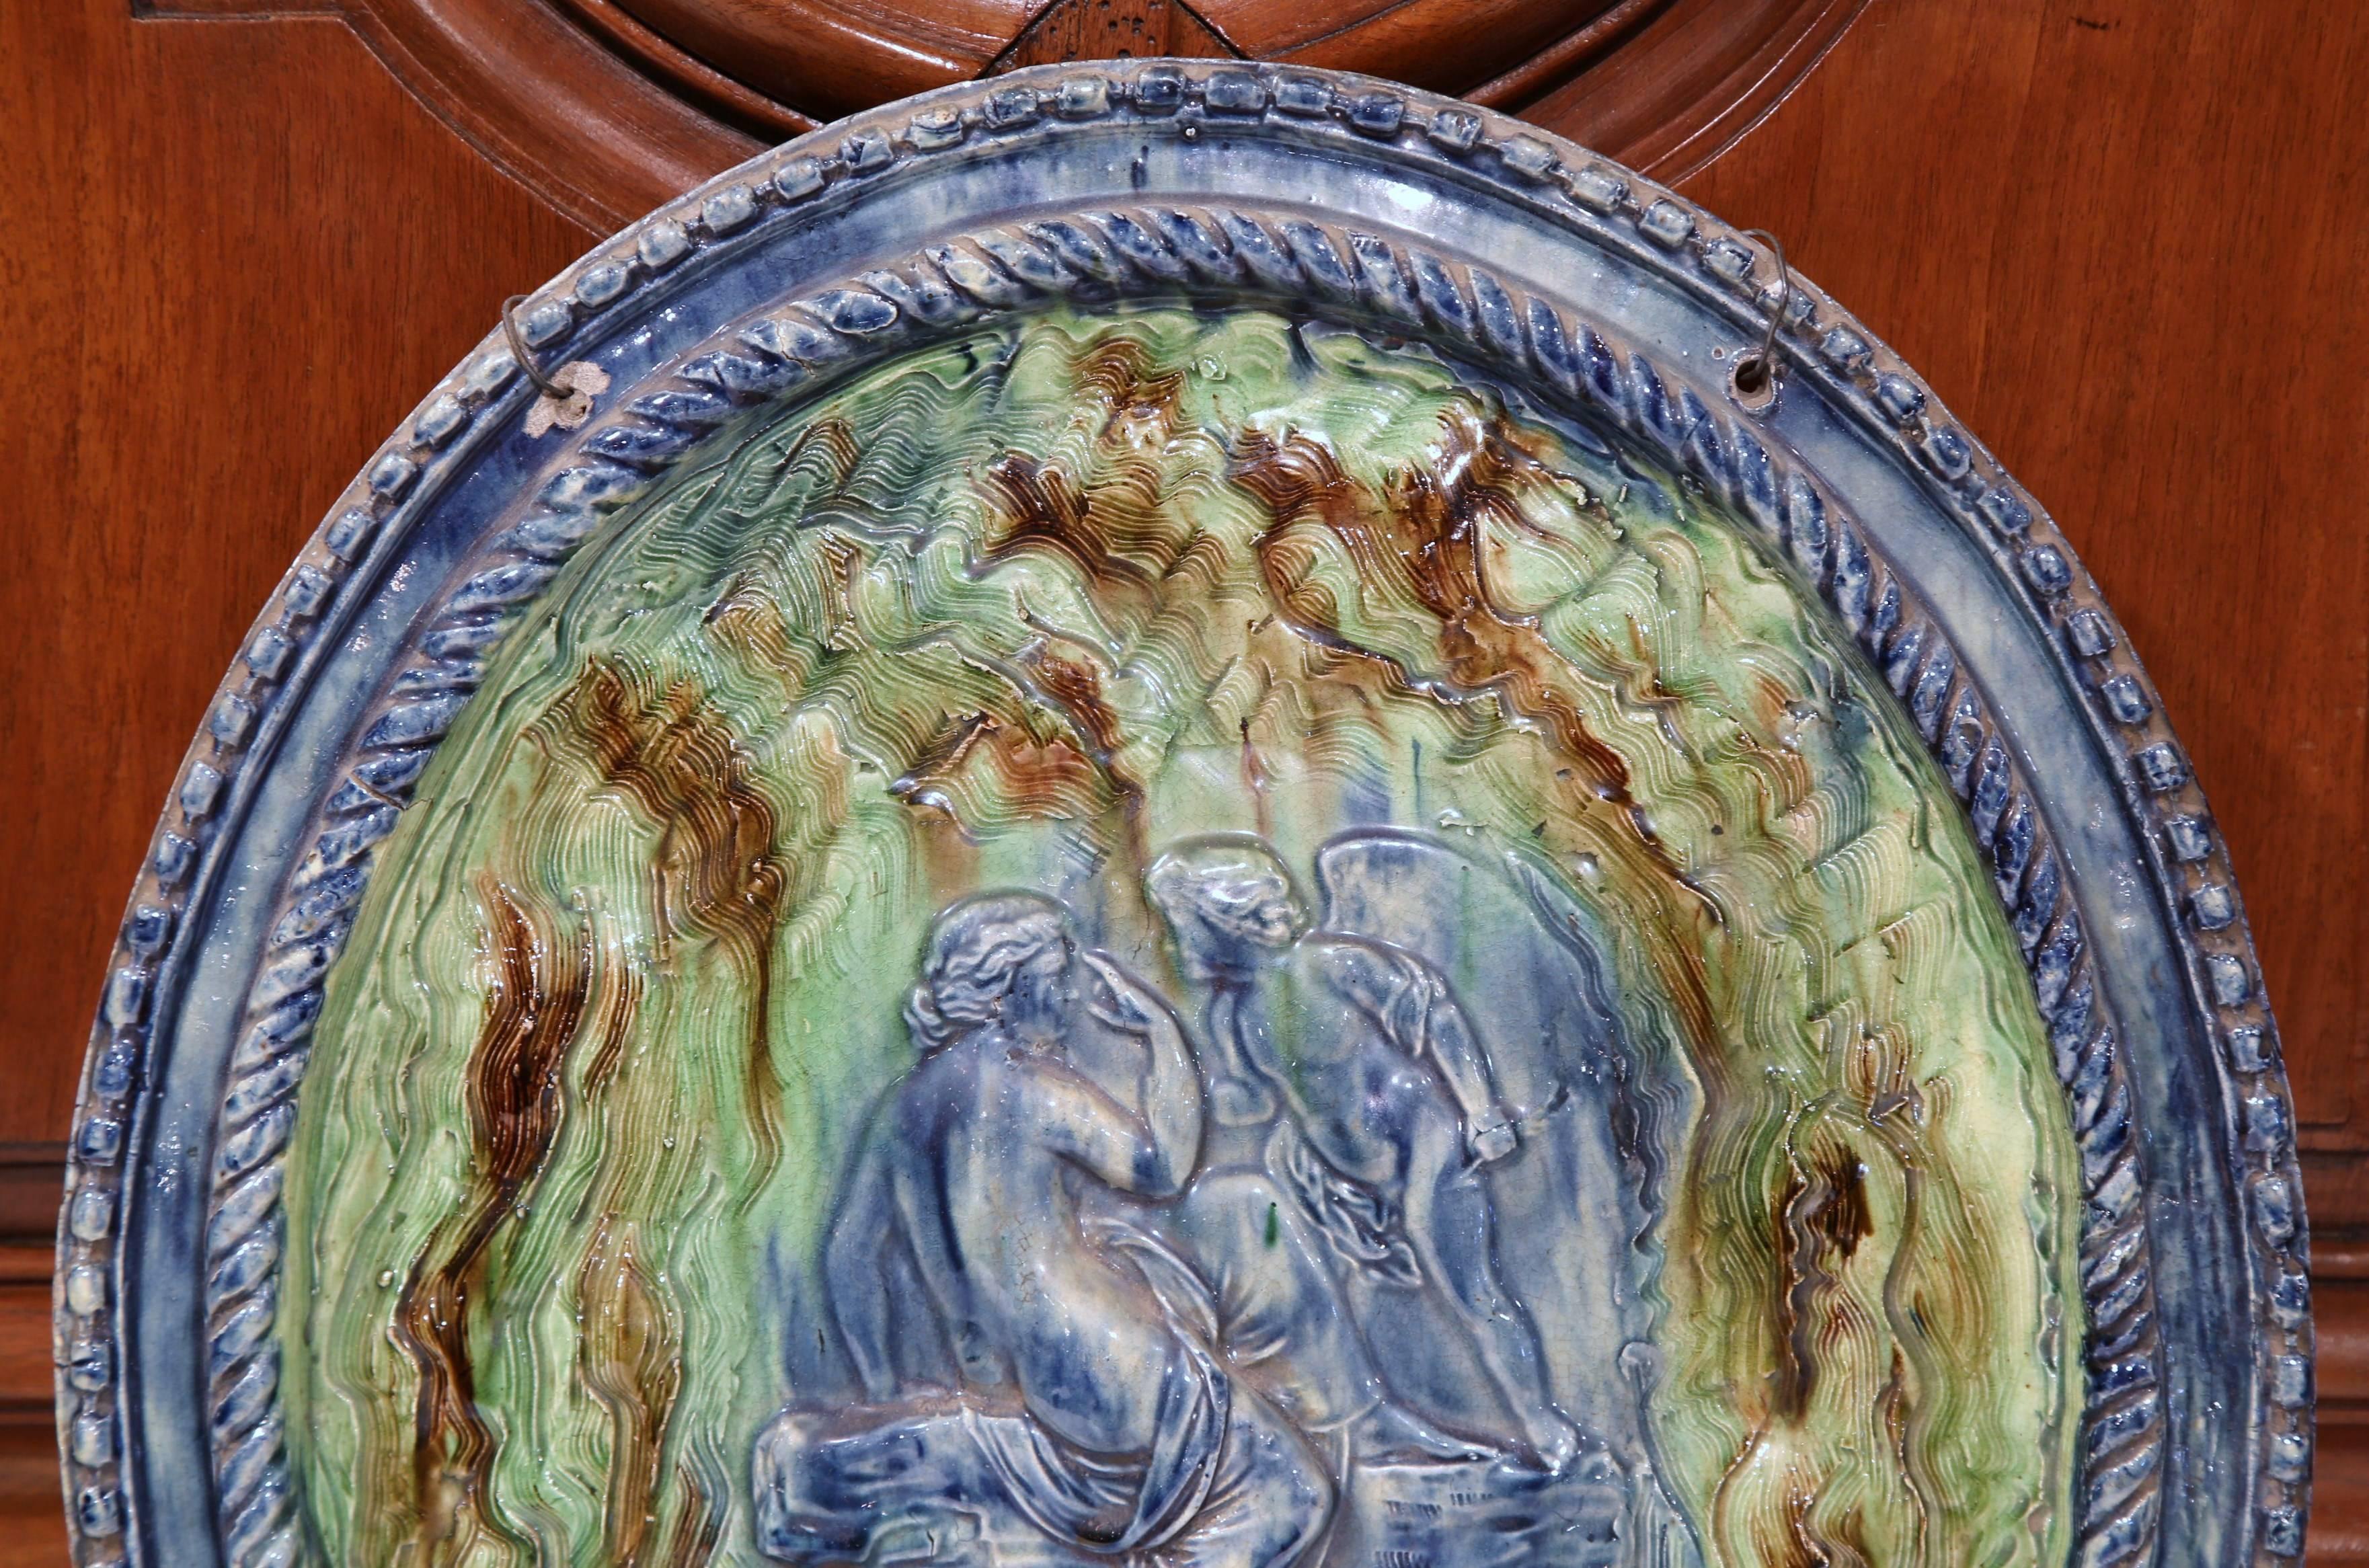 This colorful, antique terracotta hanging plate was sculpted in Beaune, France, circa 1860. The oval plate is hand painted in a green and violet palette and has a beautiful trompe l'oeil texture. The wall decoration features two Italian style